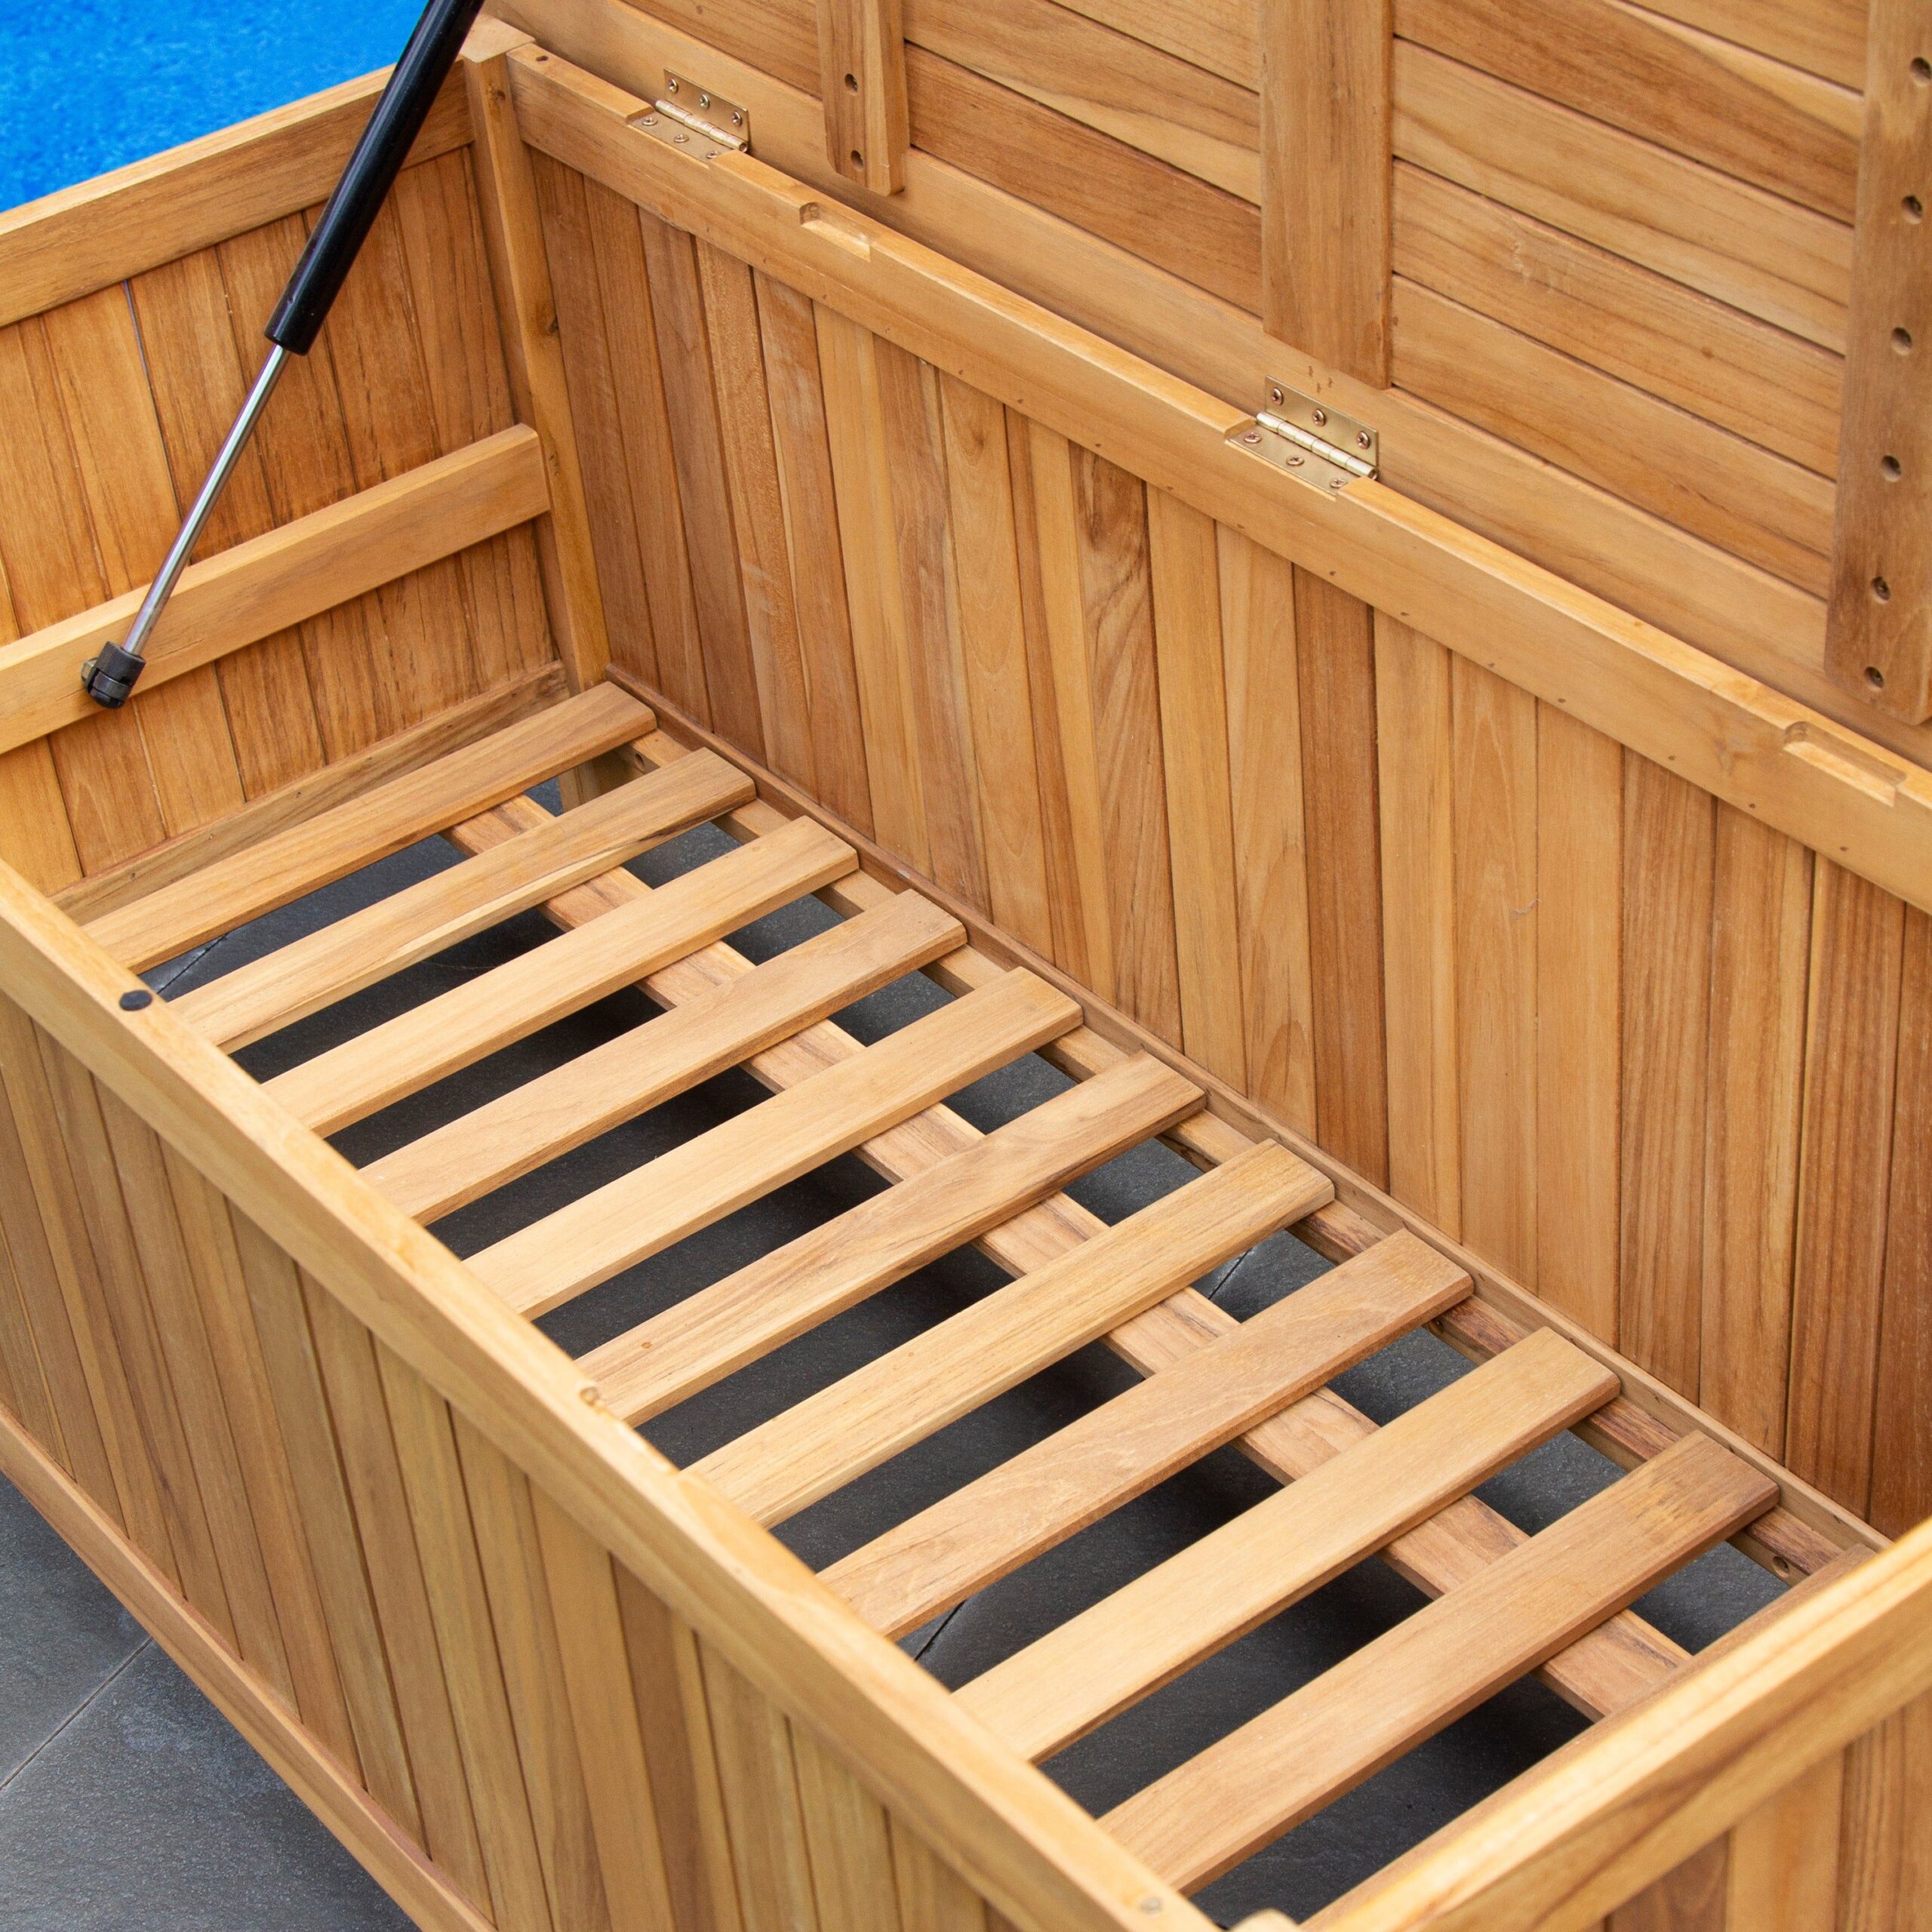 Maximize Your Outdoor Space with a Stylish Deck Storage Box